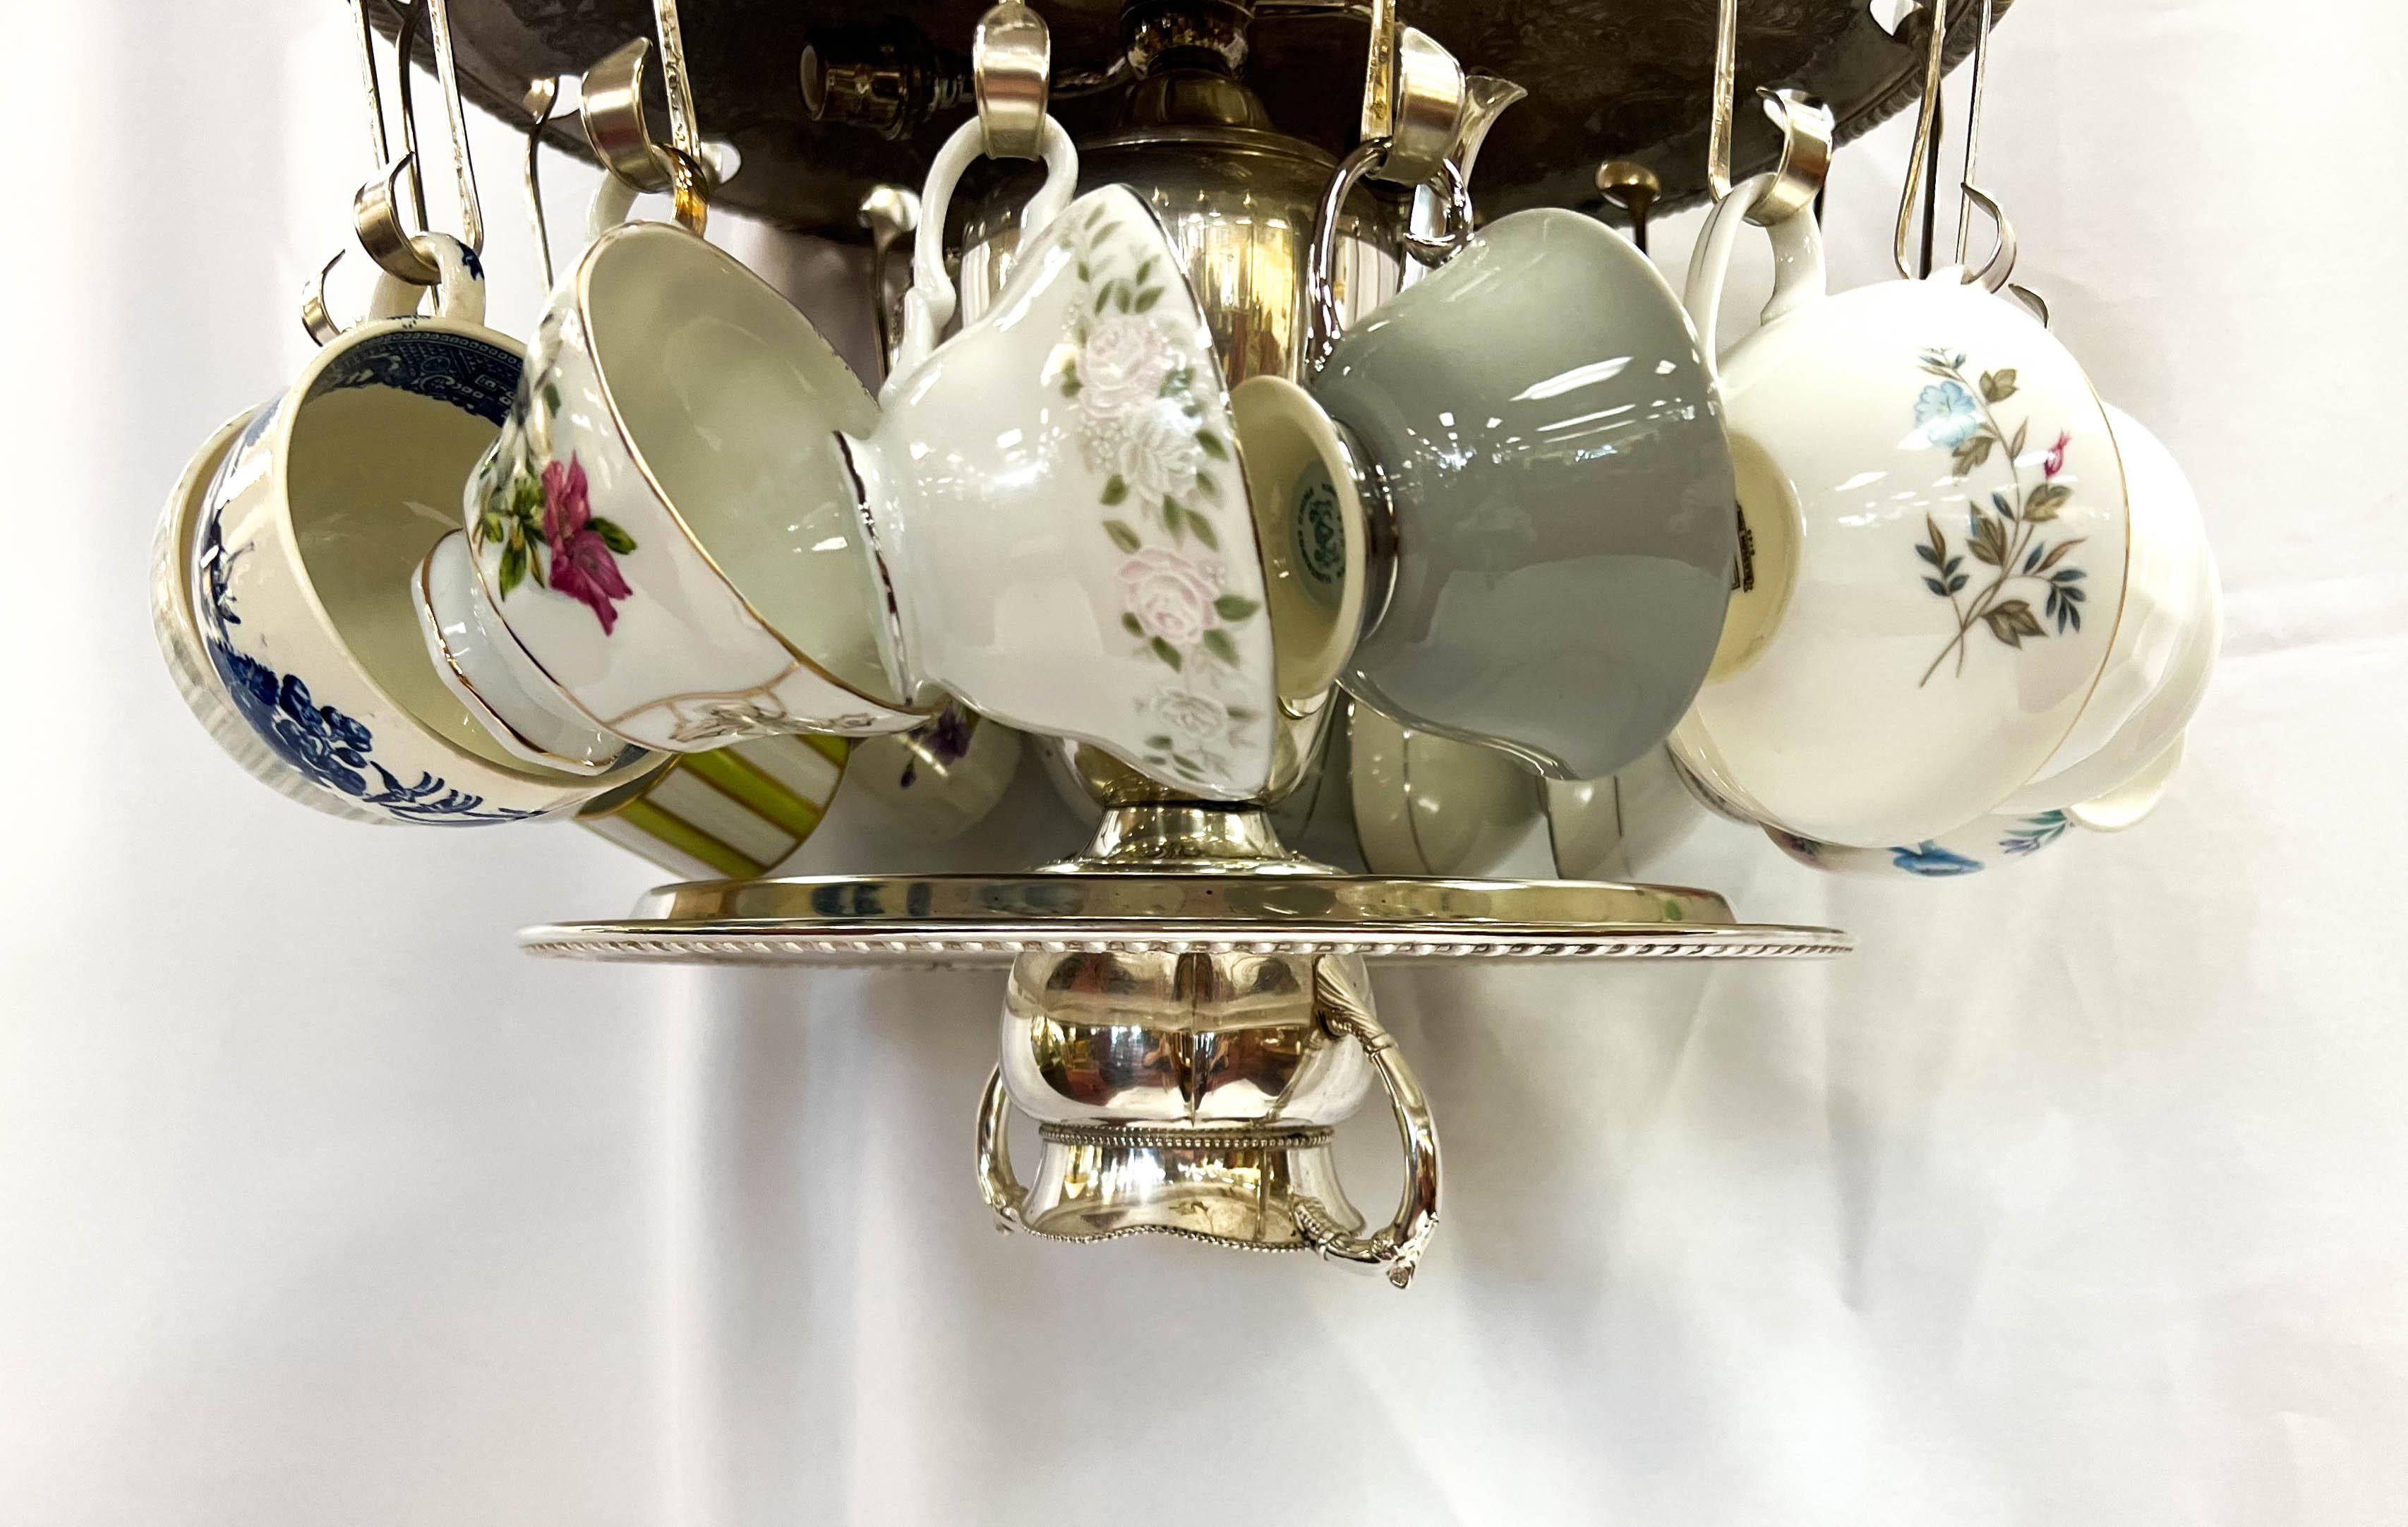 Late 20th Century One-Of-A-Kind Handcrafted Teacup Chandelier